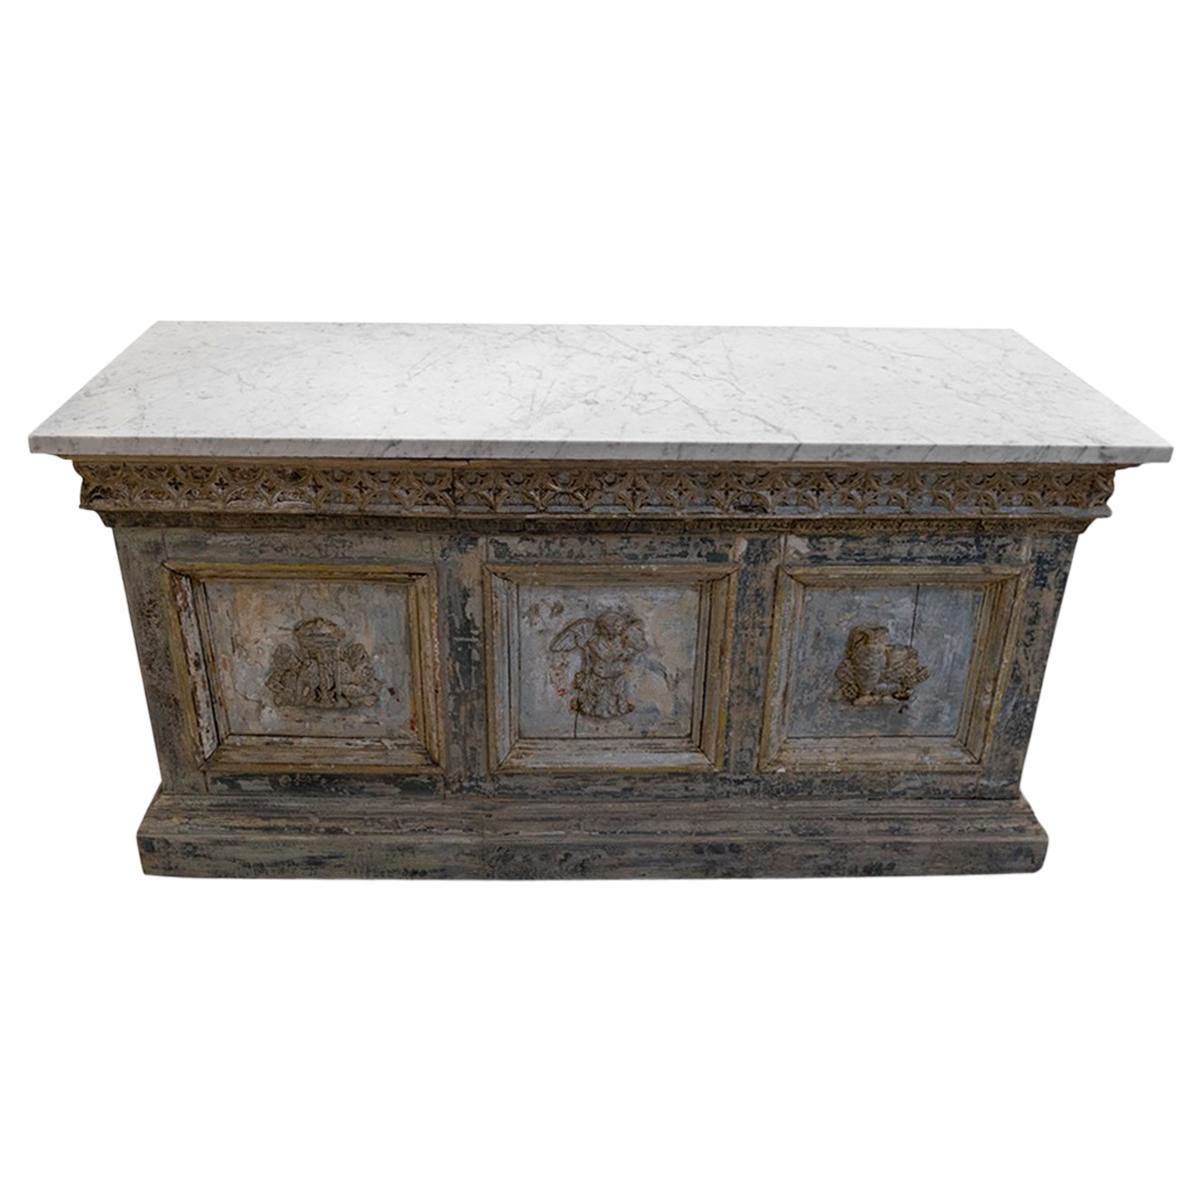 Late 18th Century Painted Double Sided Counter with a White Marble Top